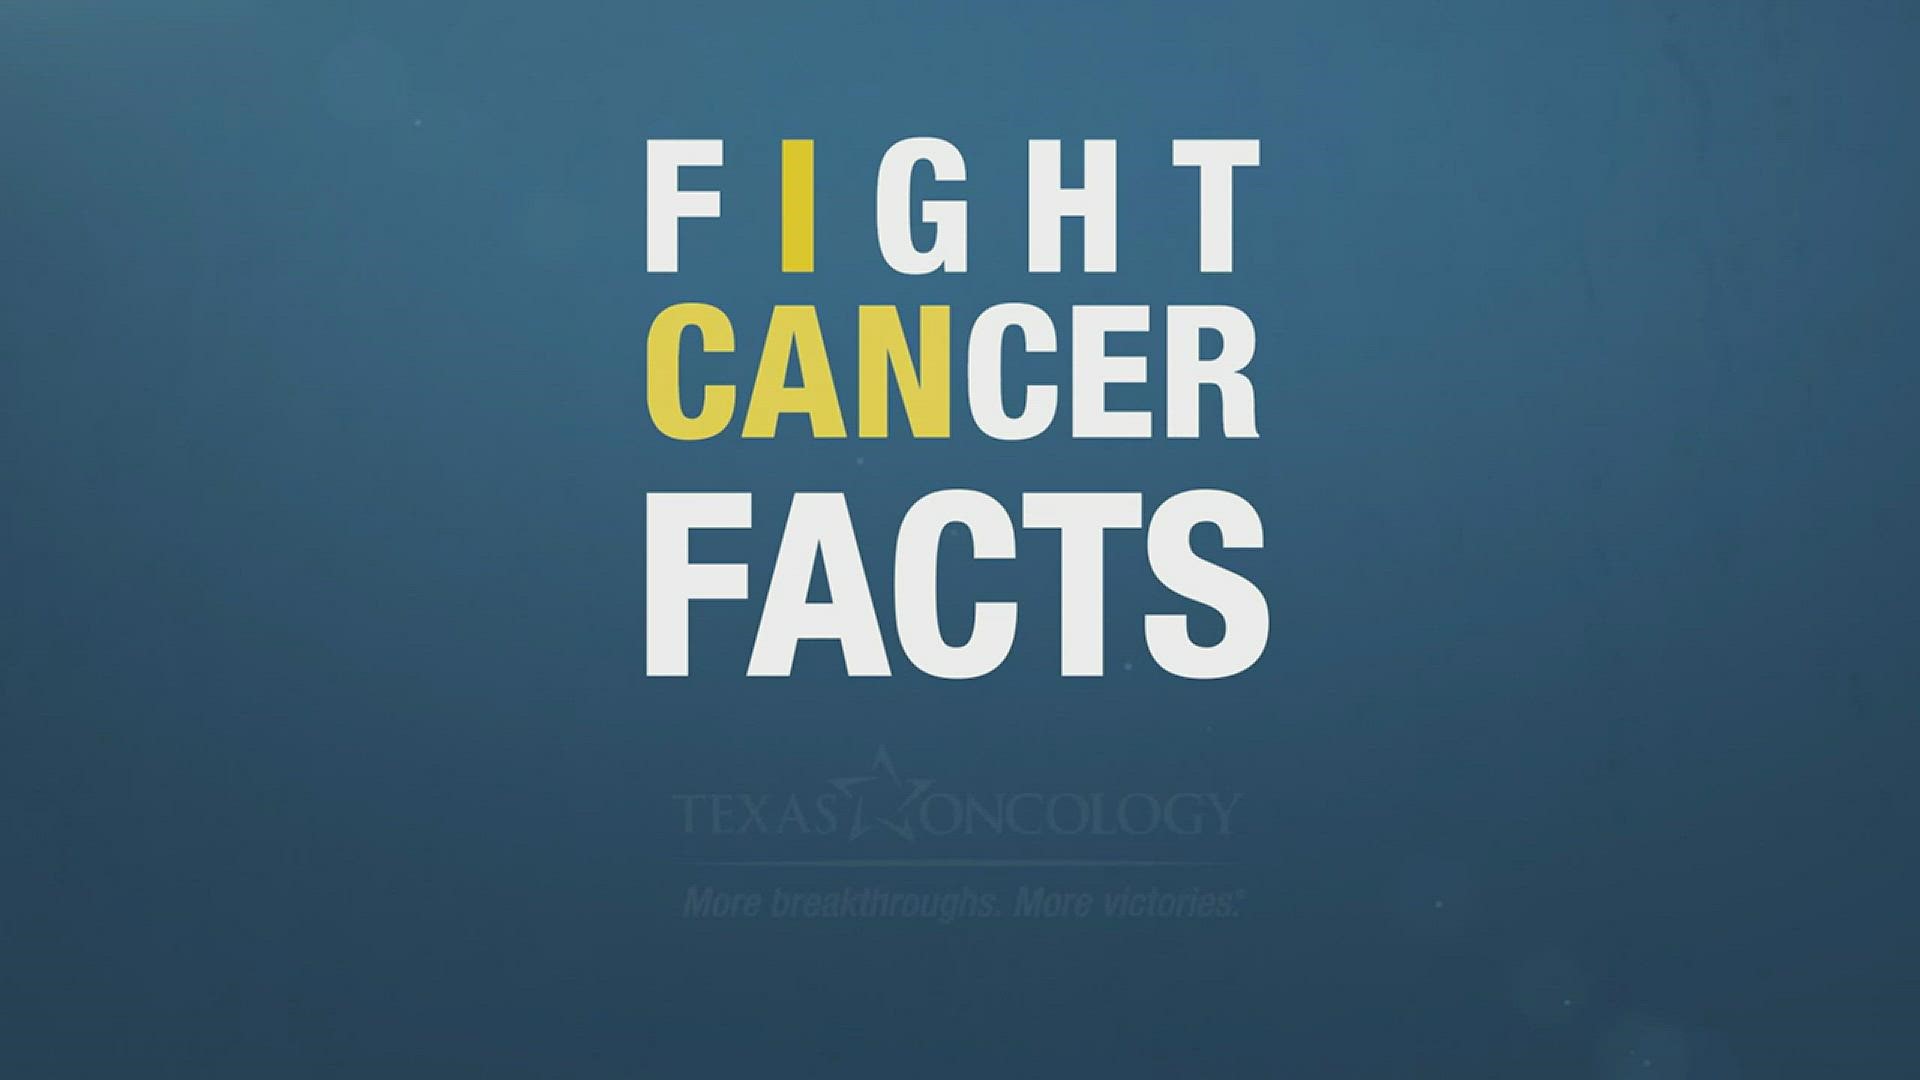 Local Texas Oncology doctor shares valuable information regarding the importance of cancer screenings for early detection.